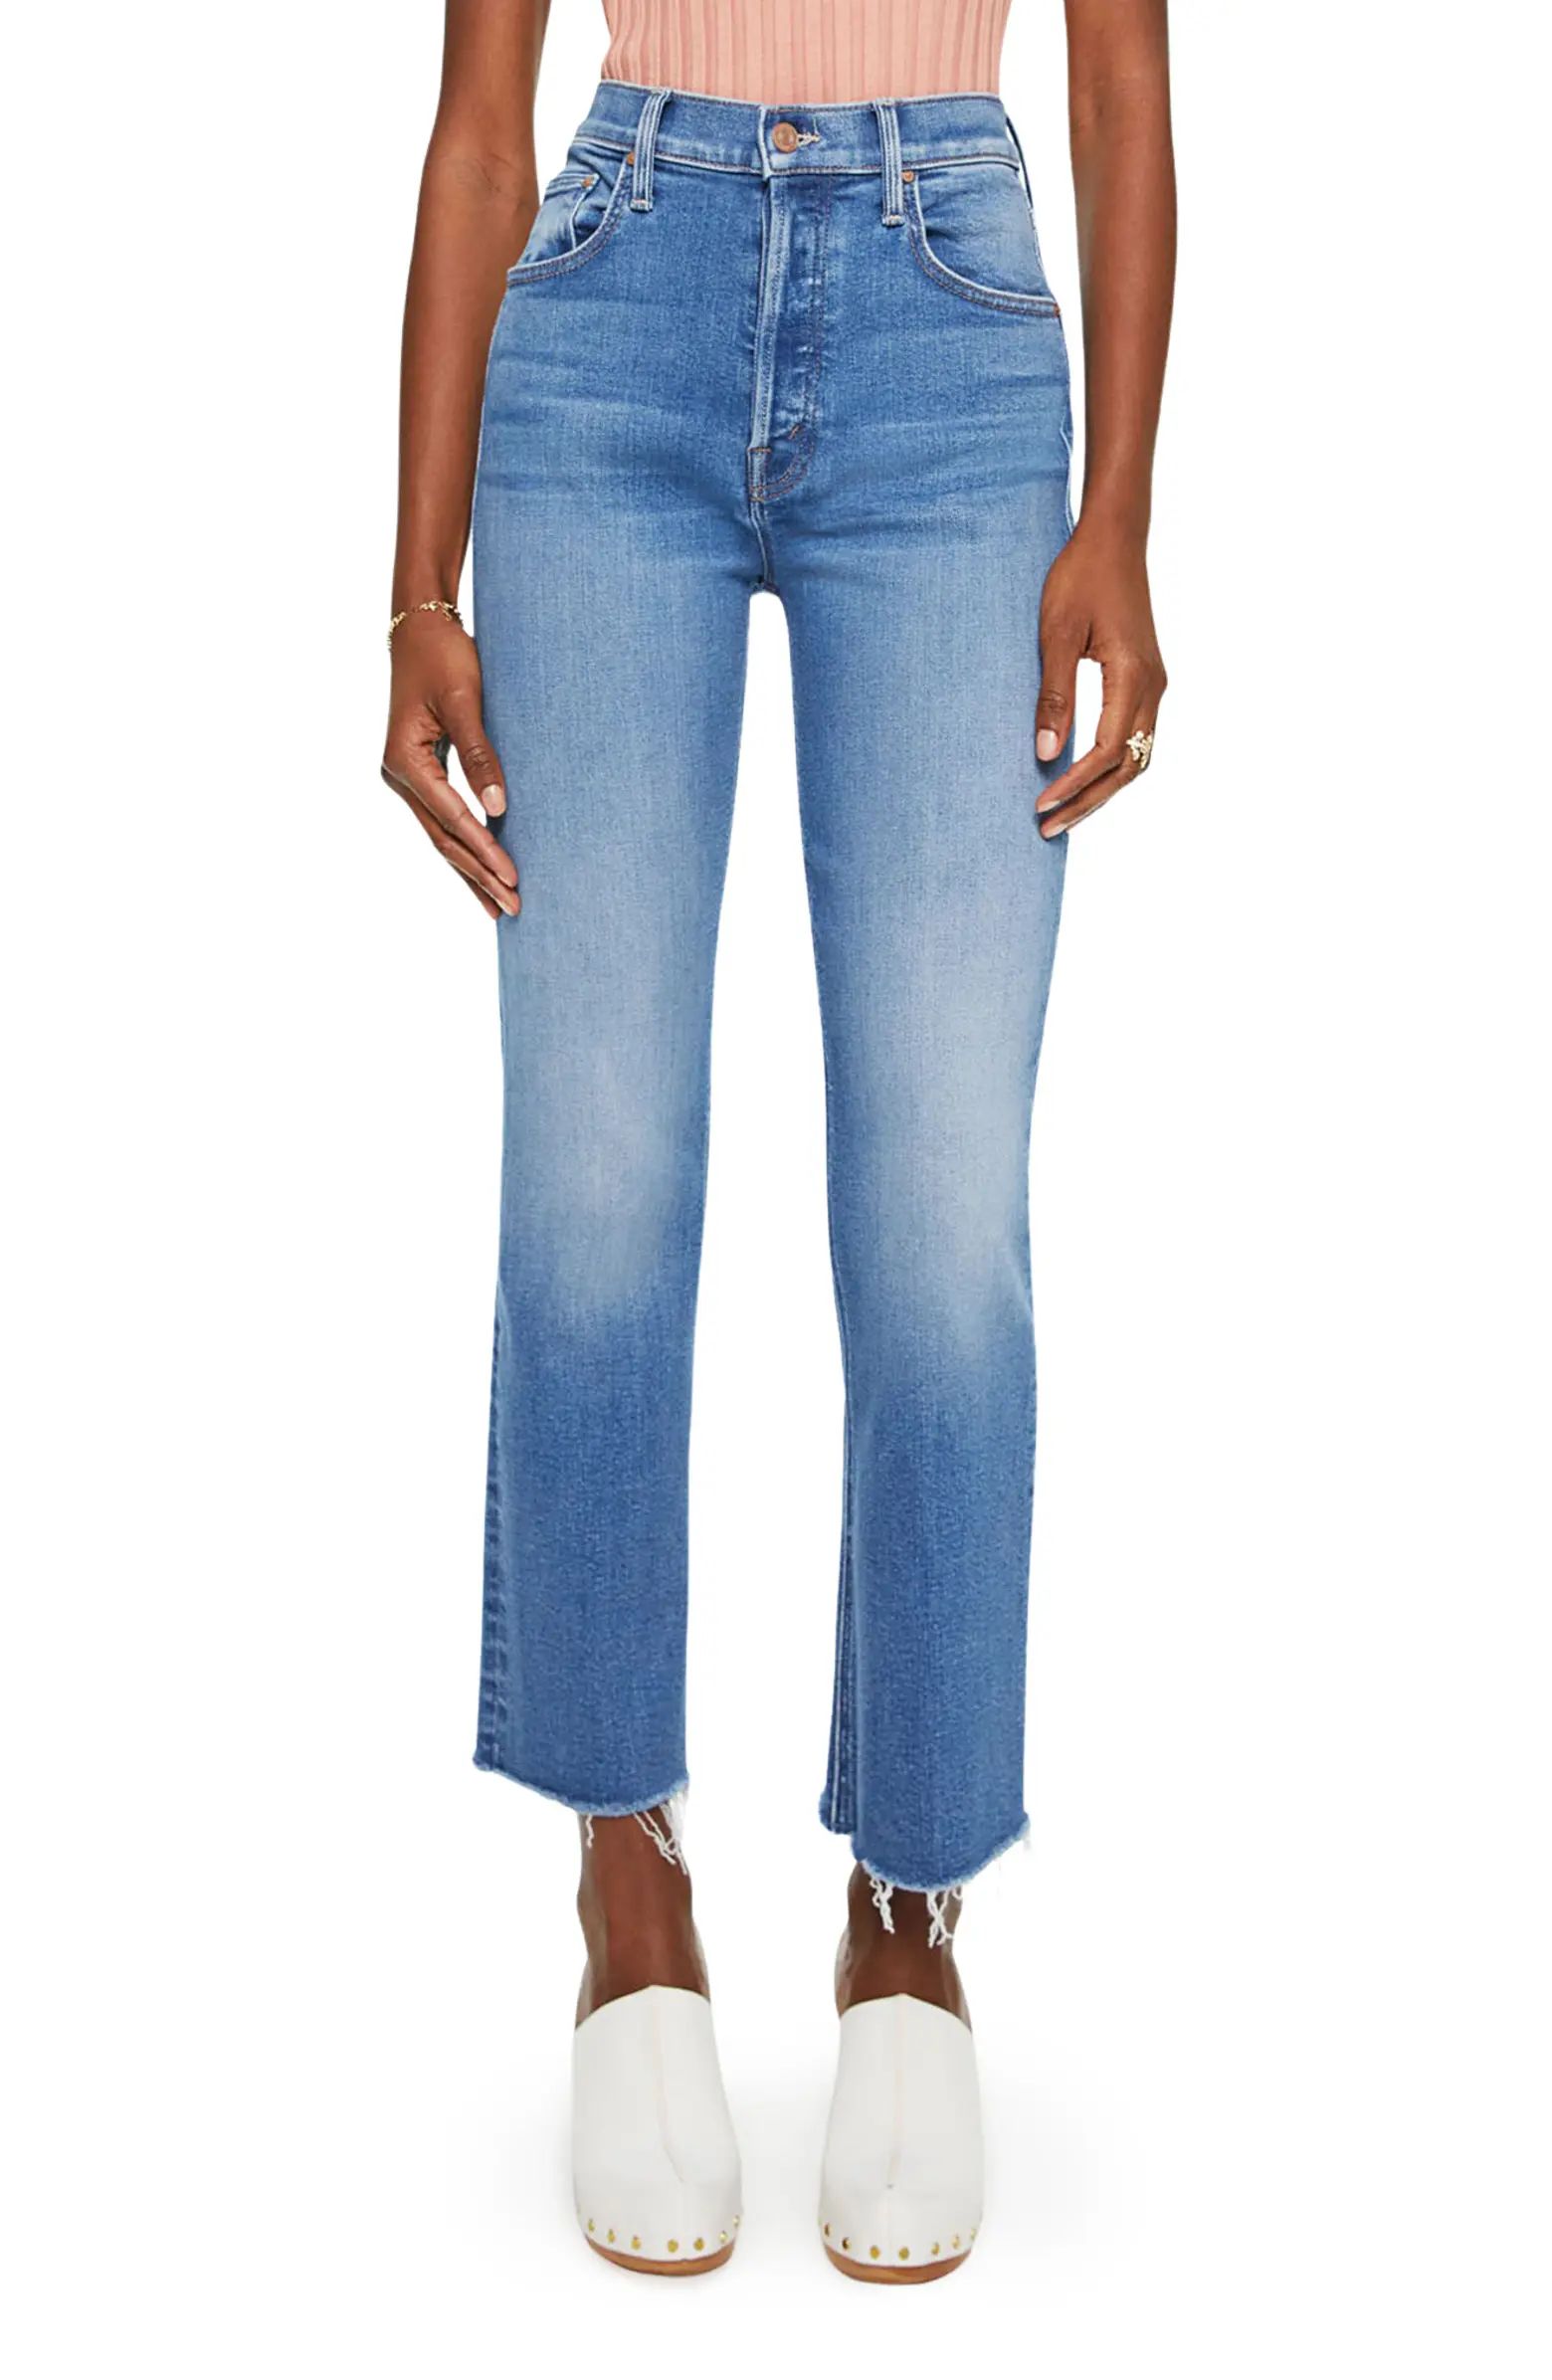 The Tripper Frayed High Waist Ankle Bootcut JeansMOTHER | Nordstrom